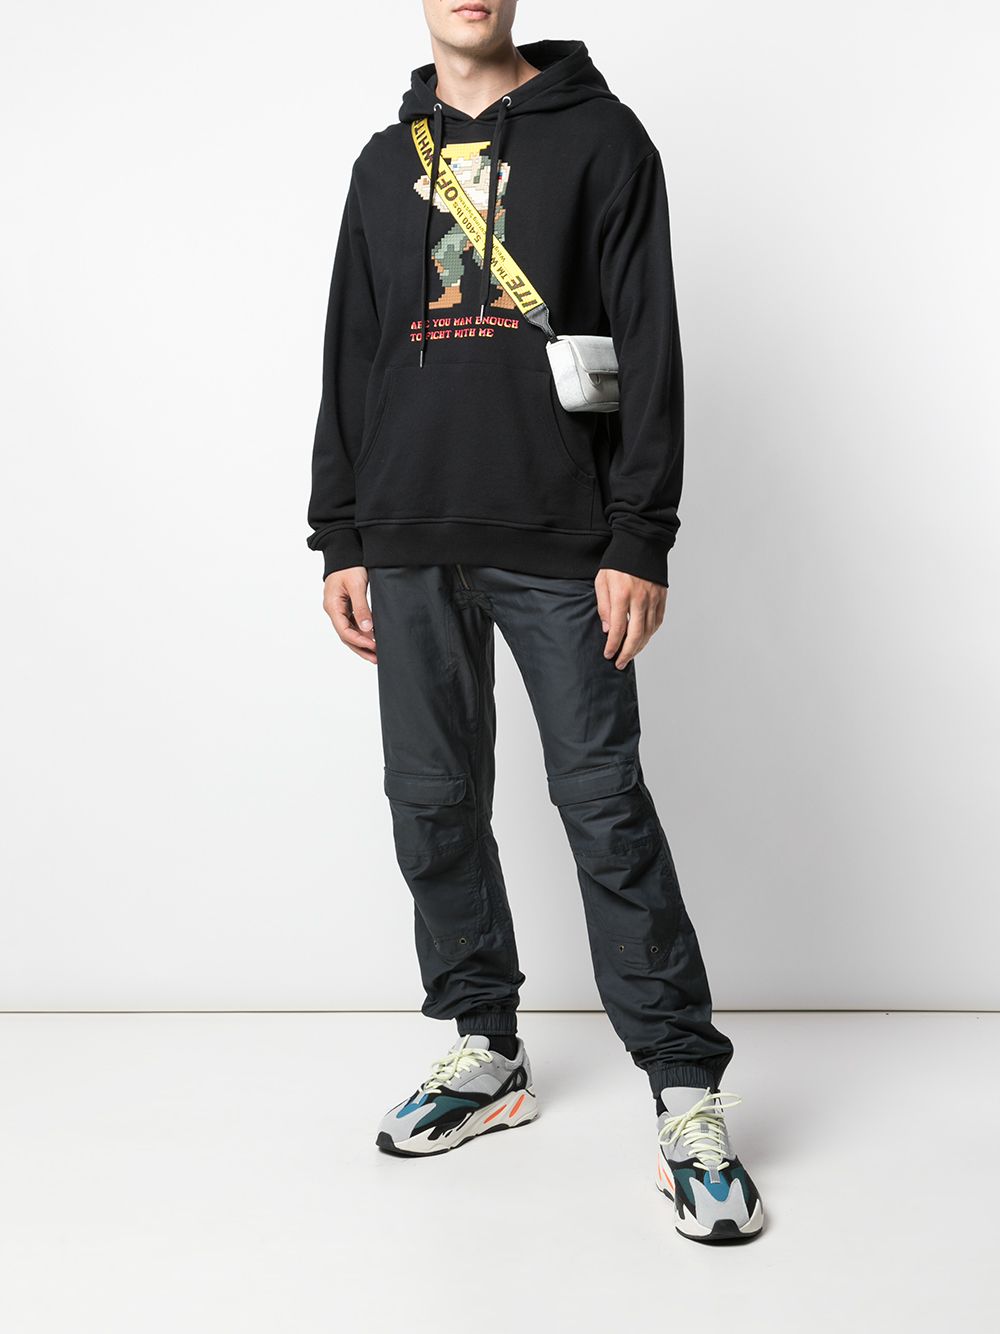 Image 2 of Mostly Heard Rarely Seen 8-Bit Combat hoodie